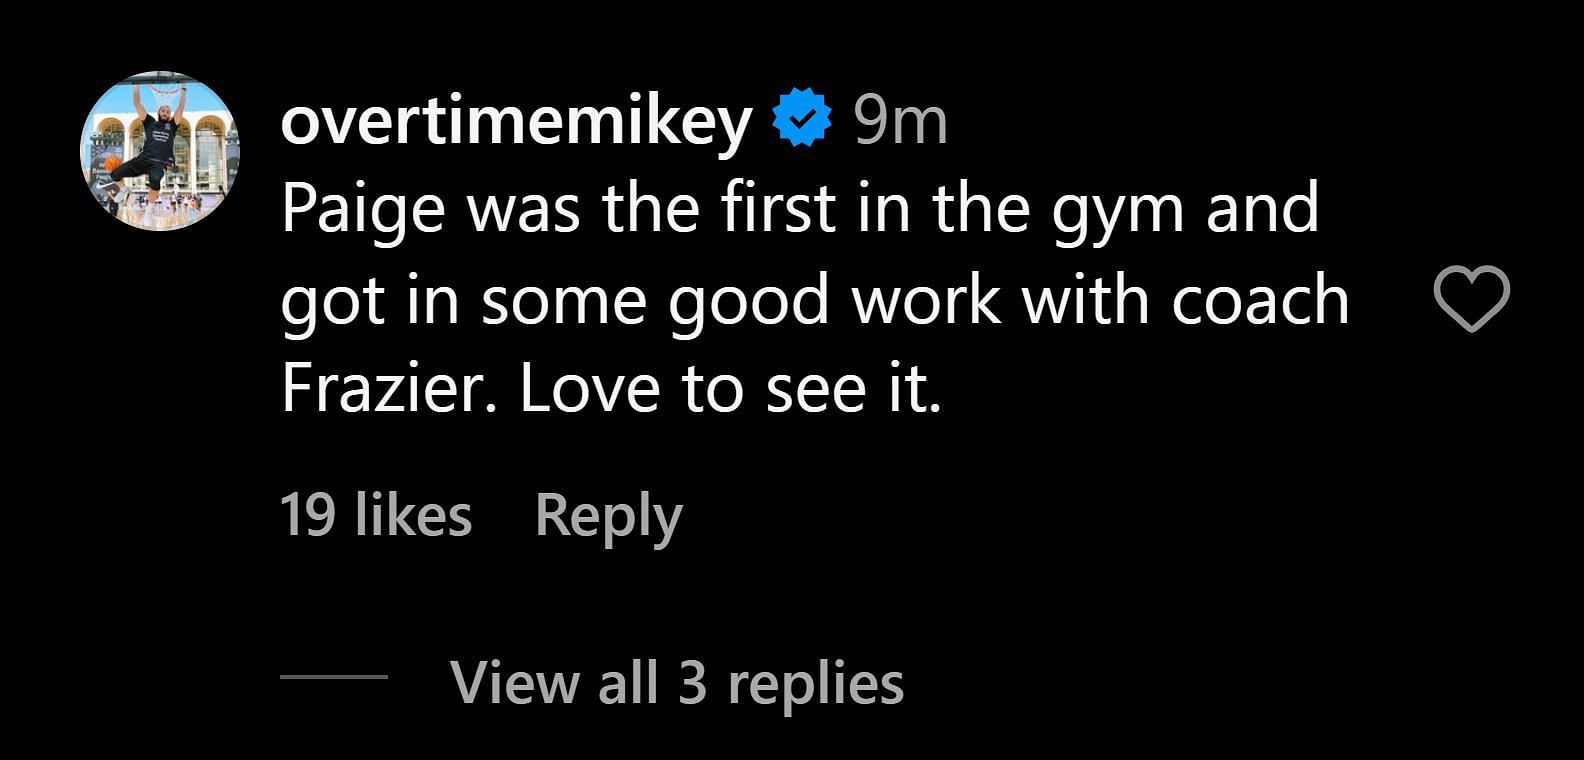 @overtimemikey comments on the post